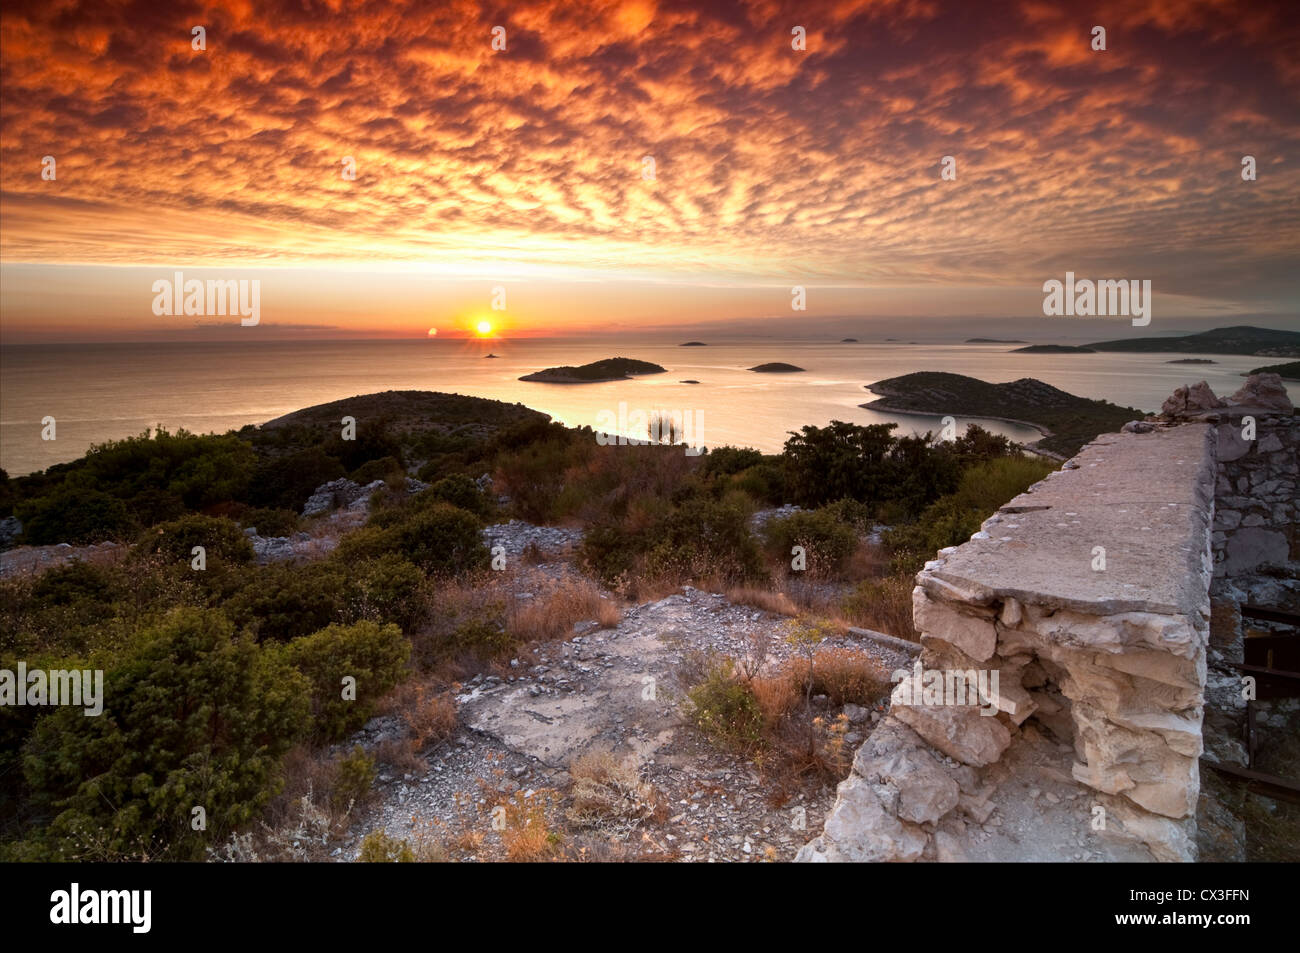 Sunset view over Adriatic sea from the ruins of old fort. Stock Photo